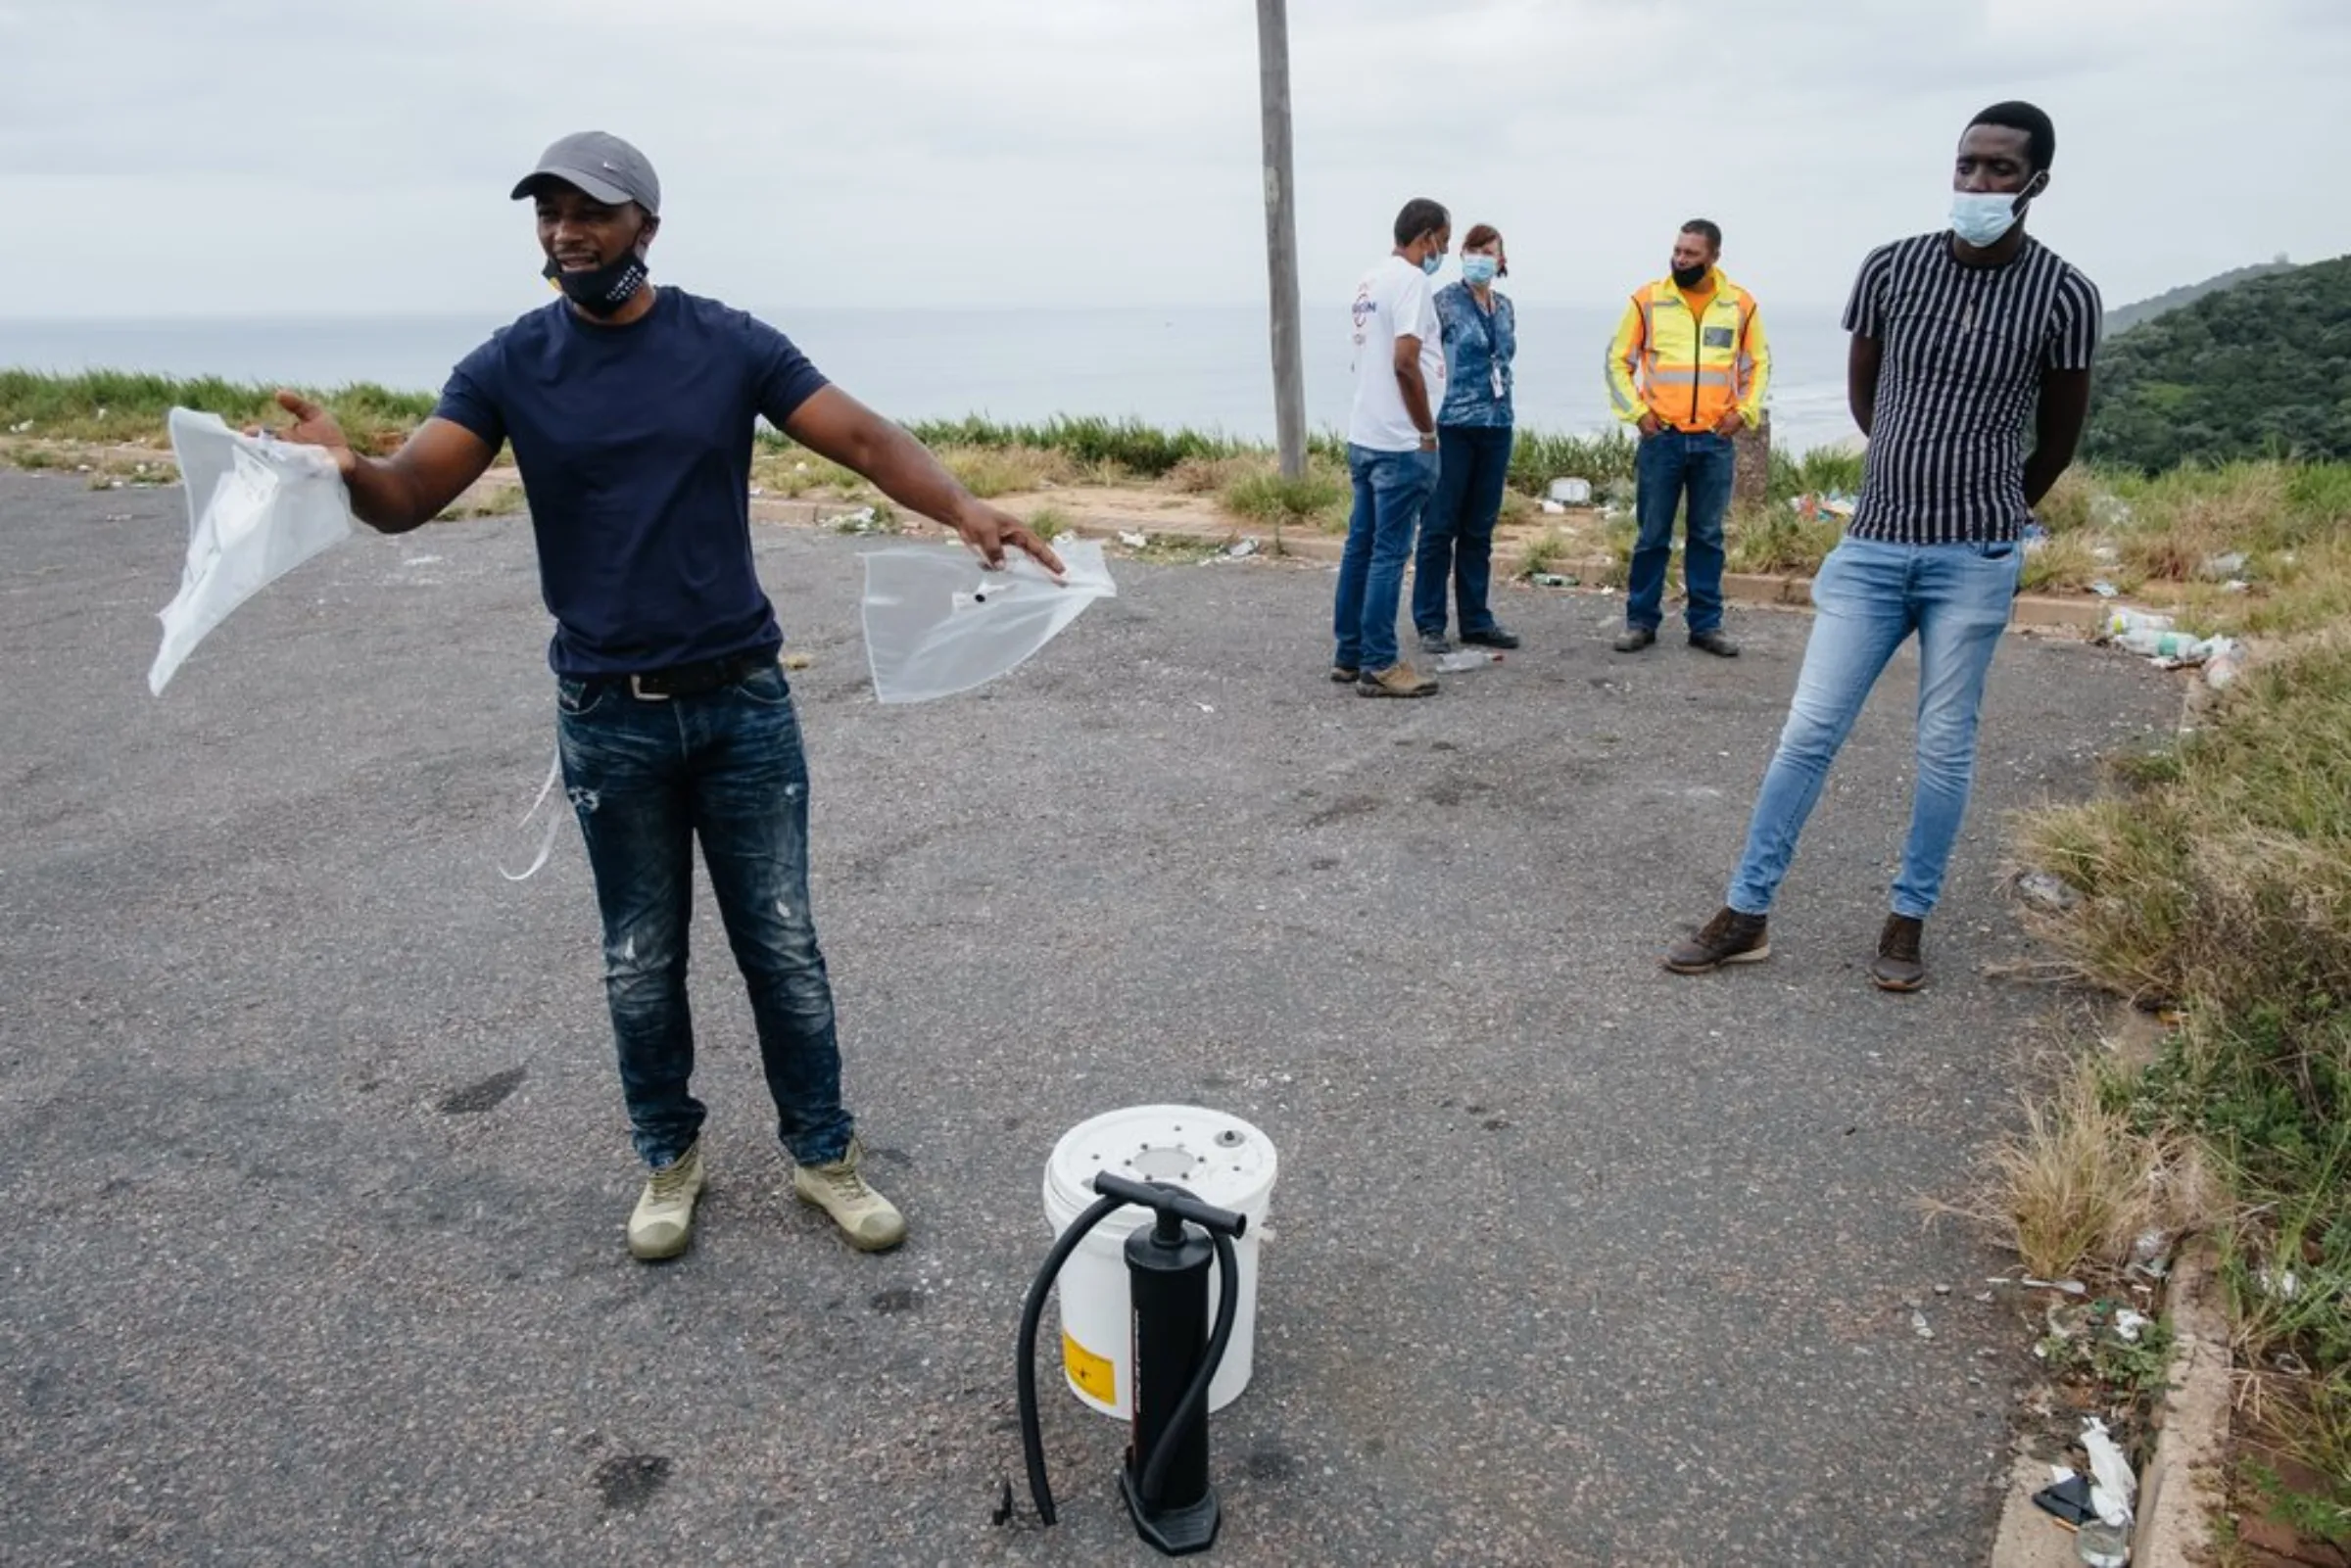 South Durban Community Environmental Alliance (SDCEA) members including Bongani Mthembu (left) prepare to measure air quality in south Durban, South Africa, April 1, 2021